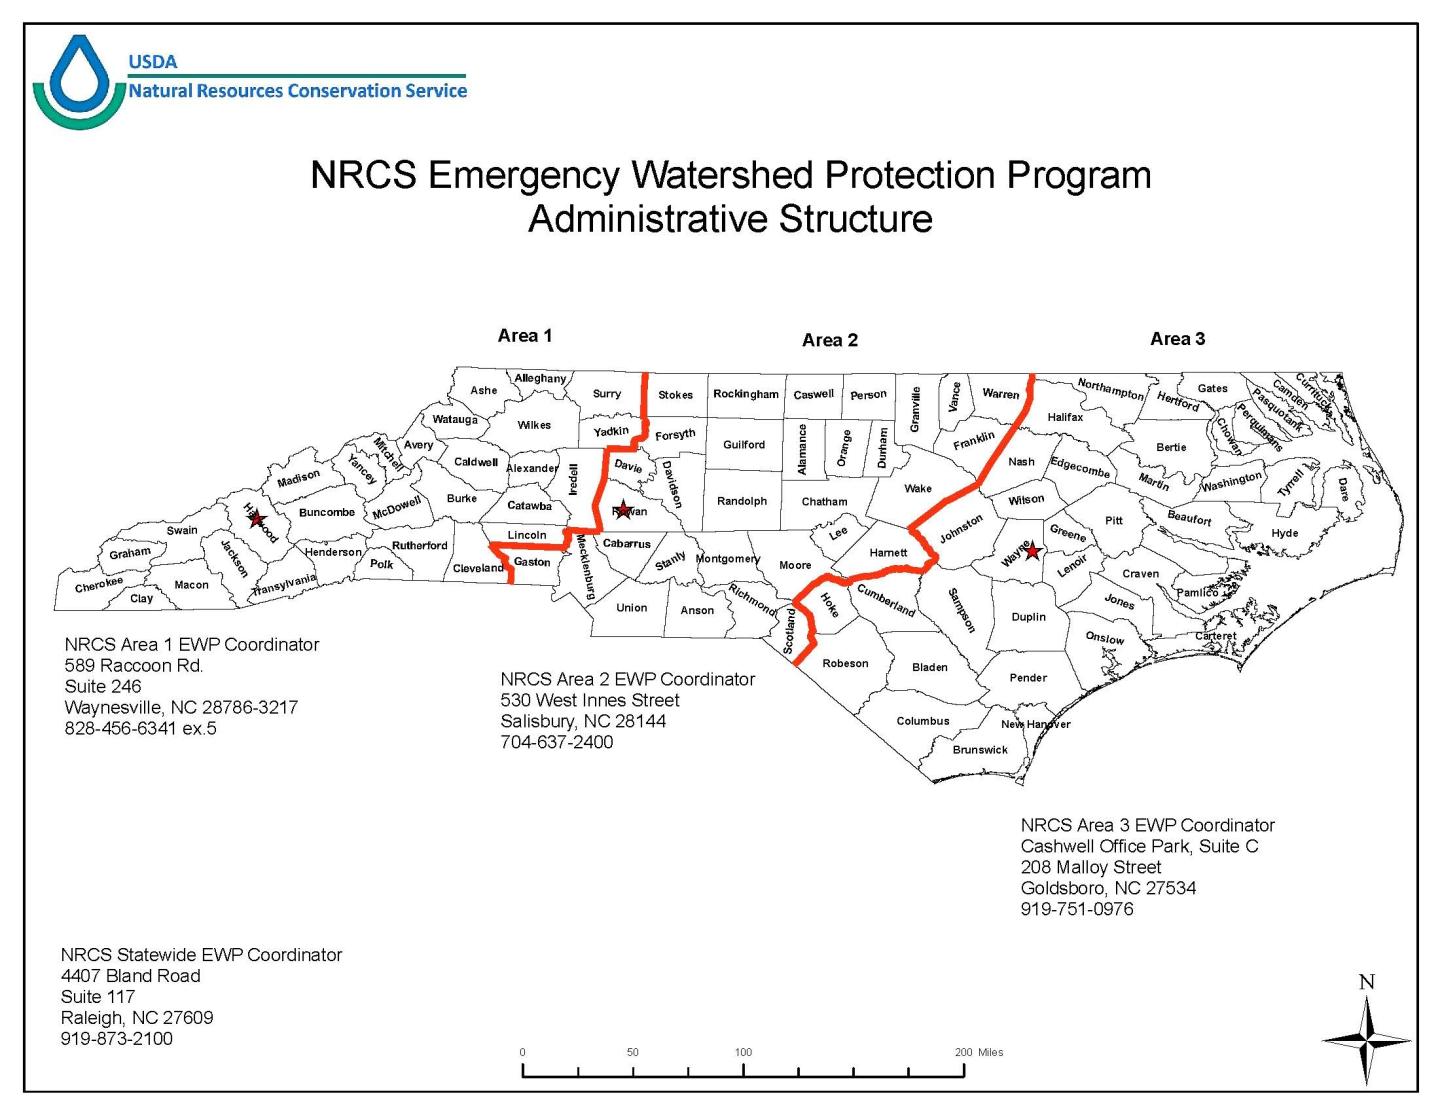 Administrative Structure for the Emergency Watershed Protection Program in N.C 